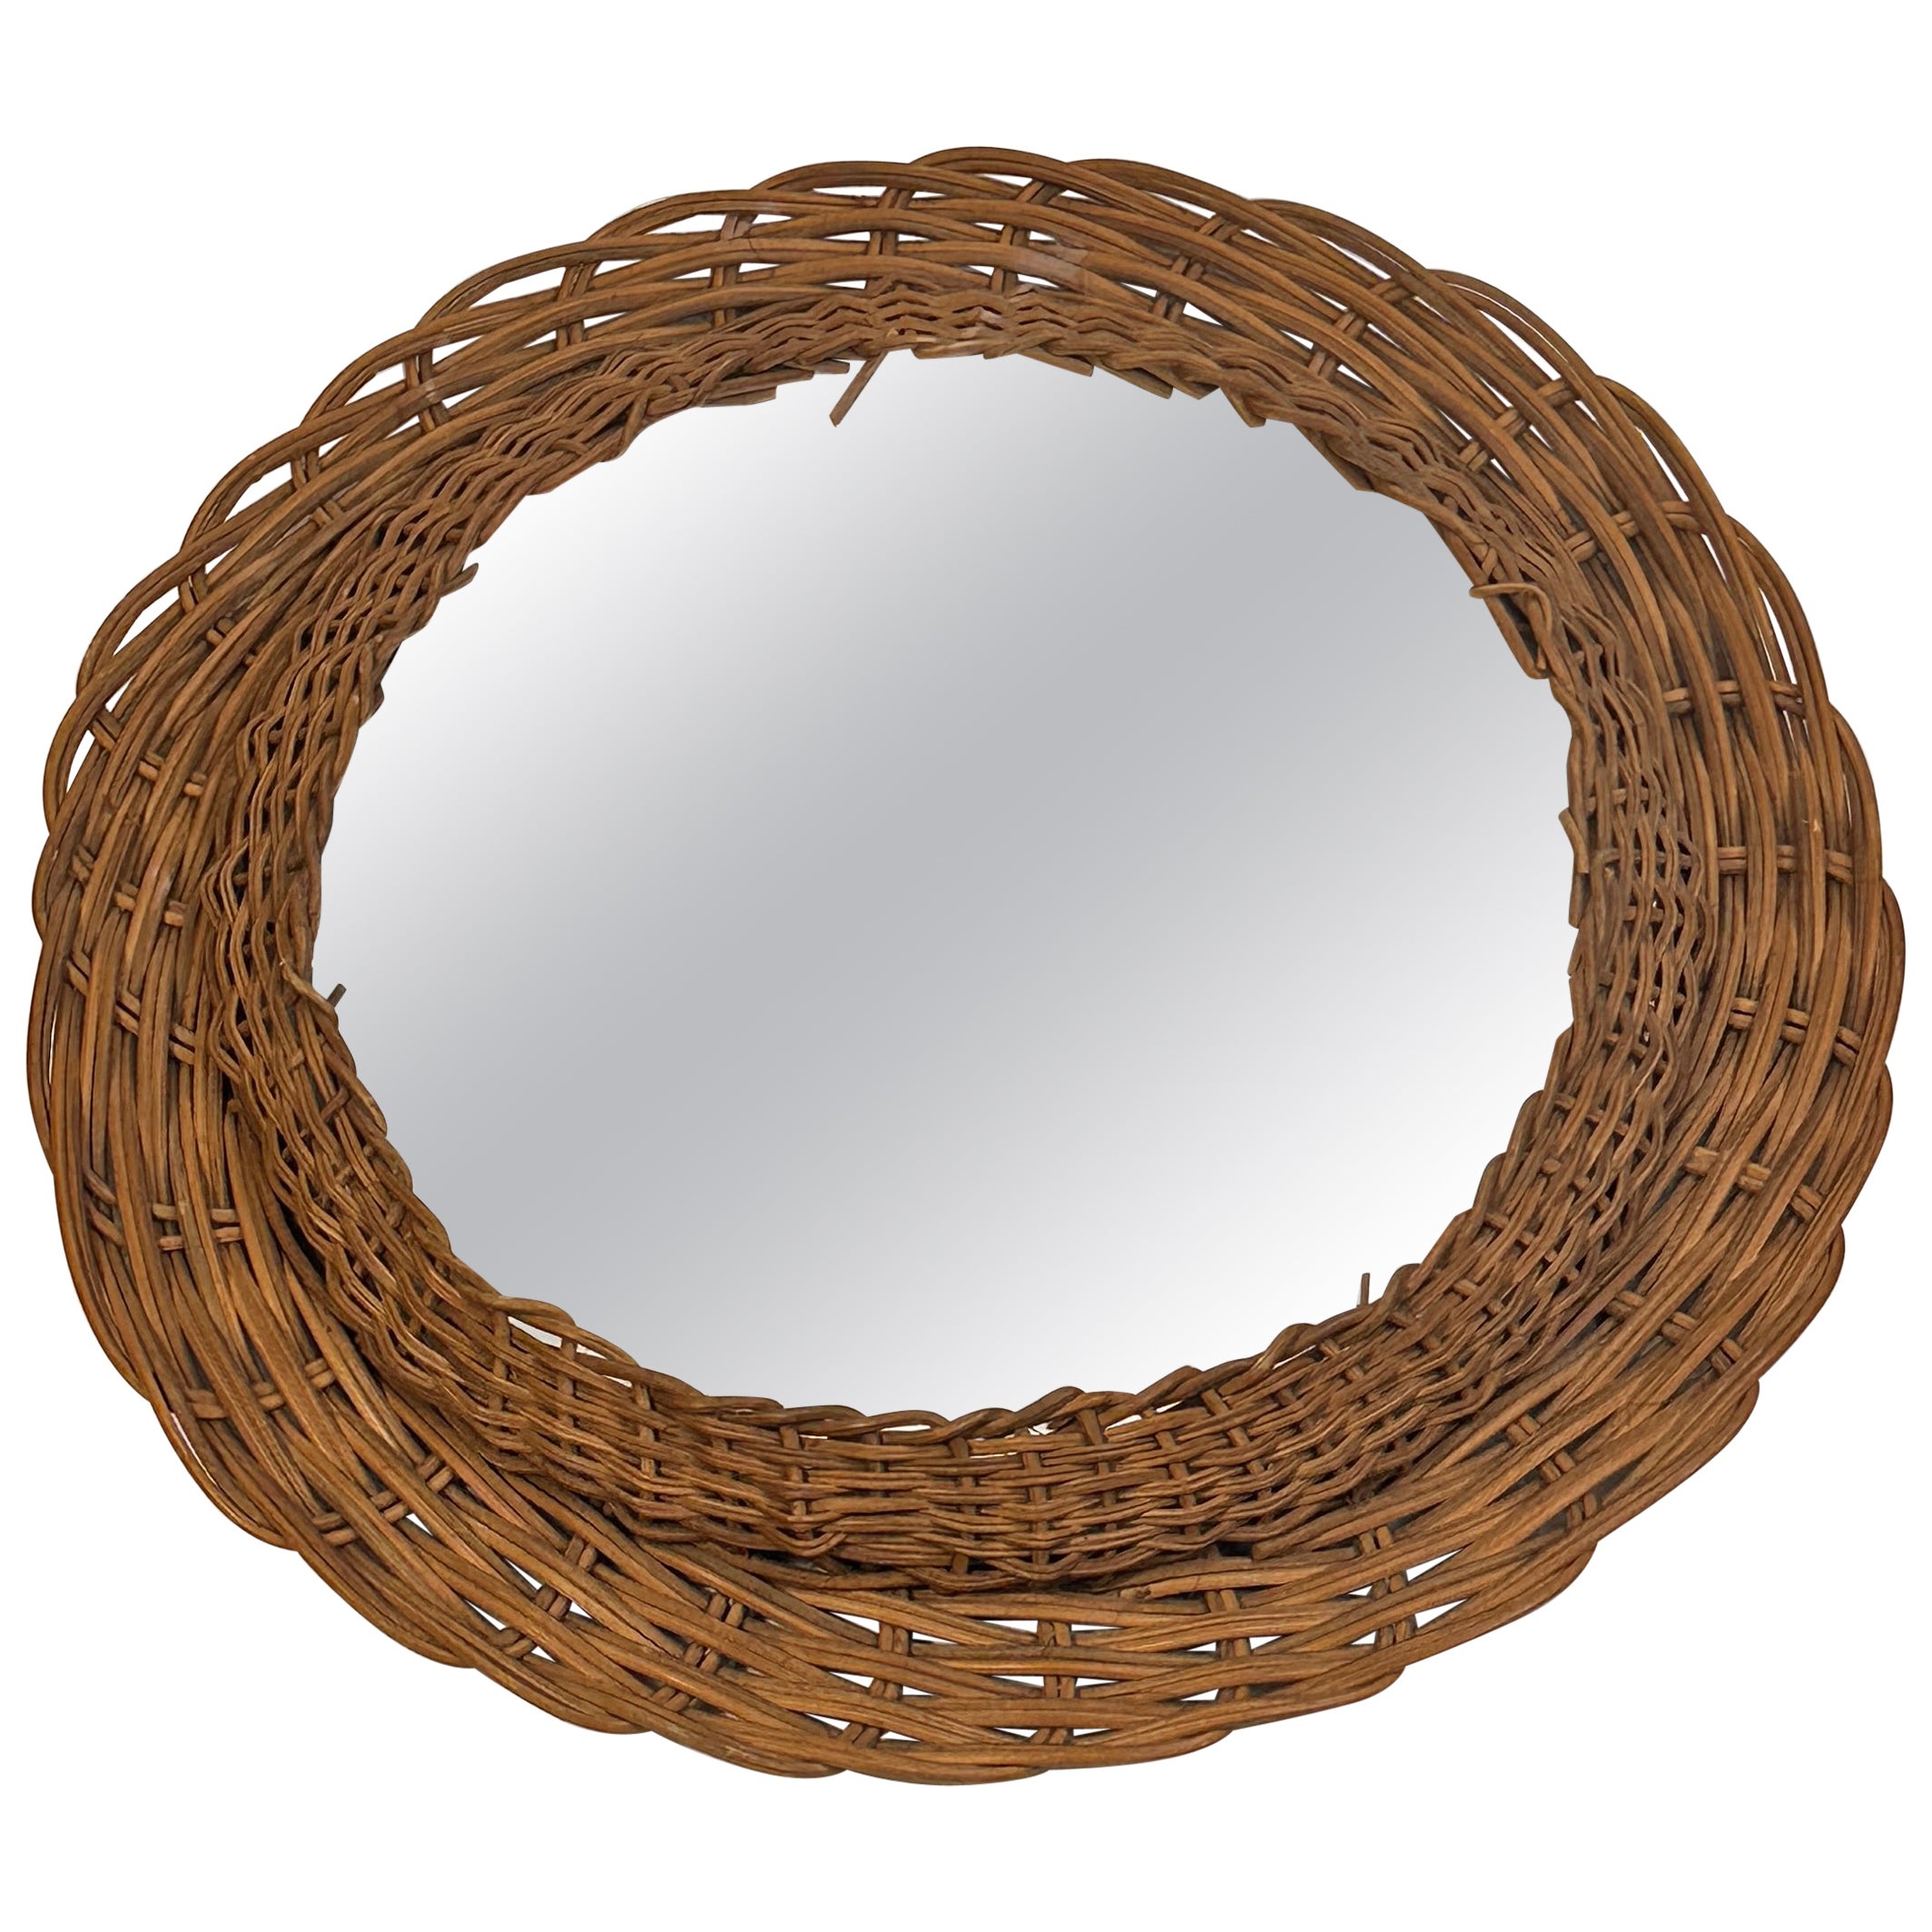 Mid-Century Modern Handcrafted Braided Rattan Mirror, Germany, 1960s For Sale